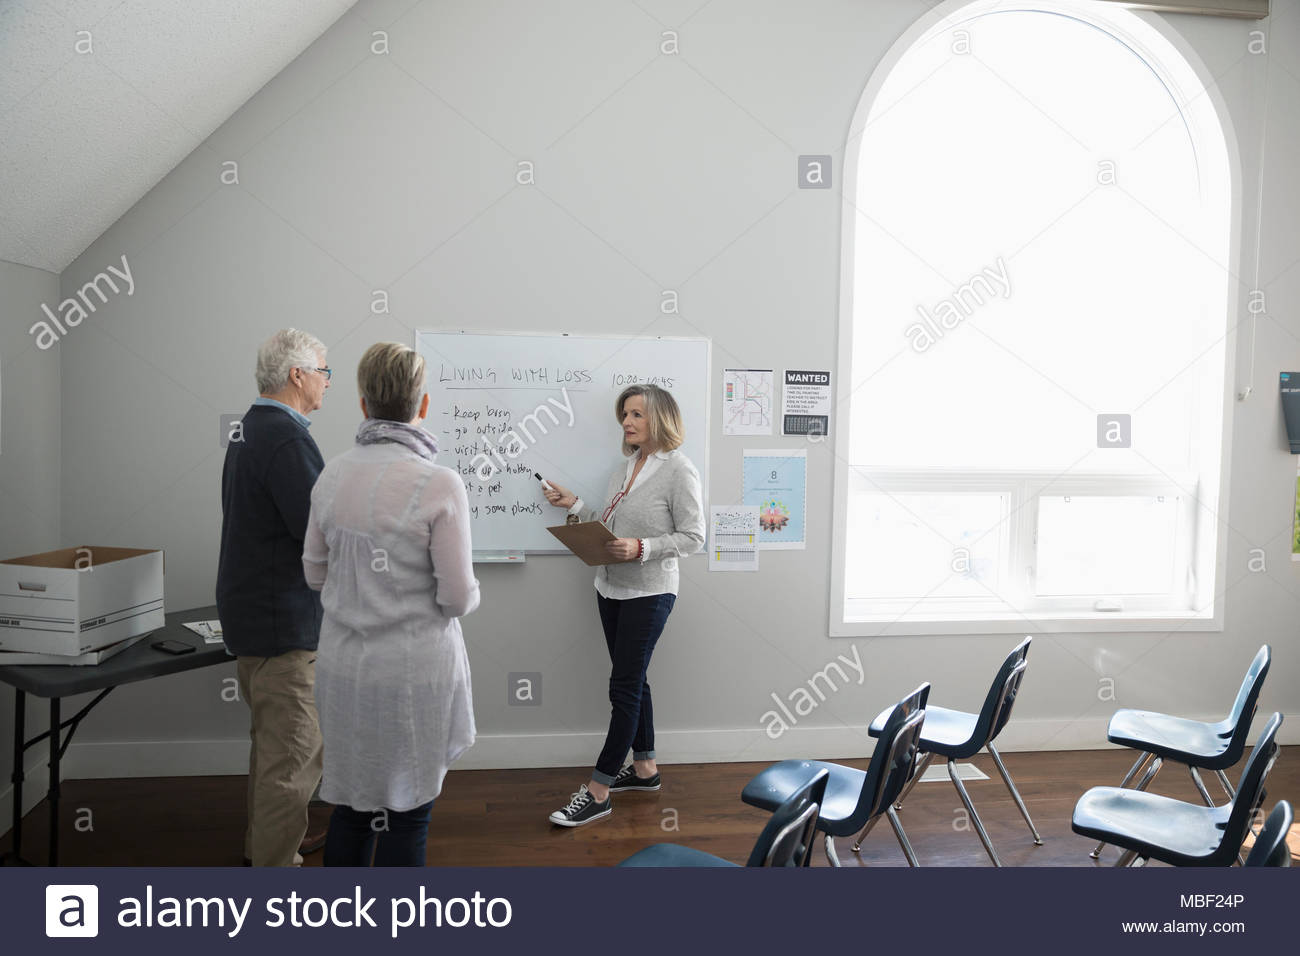 Woman at whiteboard leading grief counseling support group in community center Stock Photo